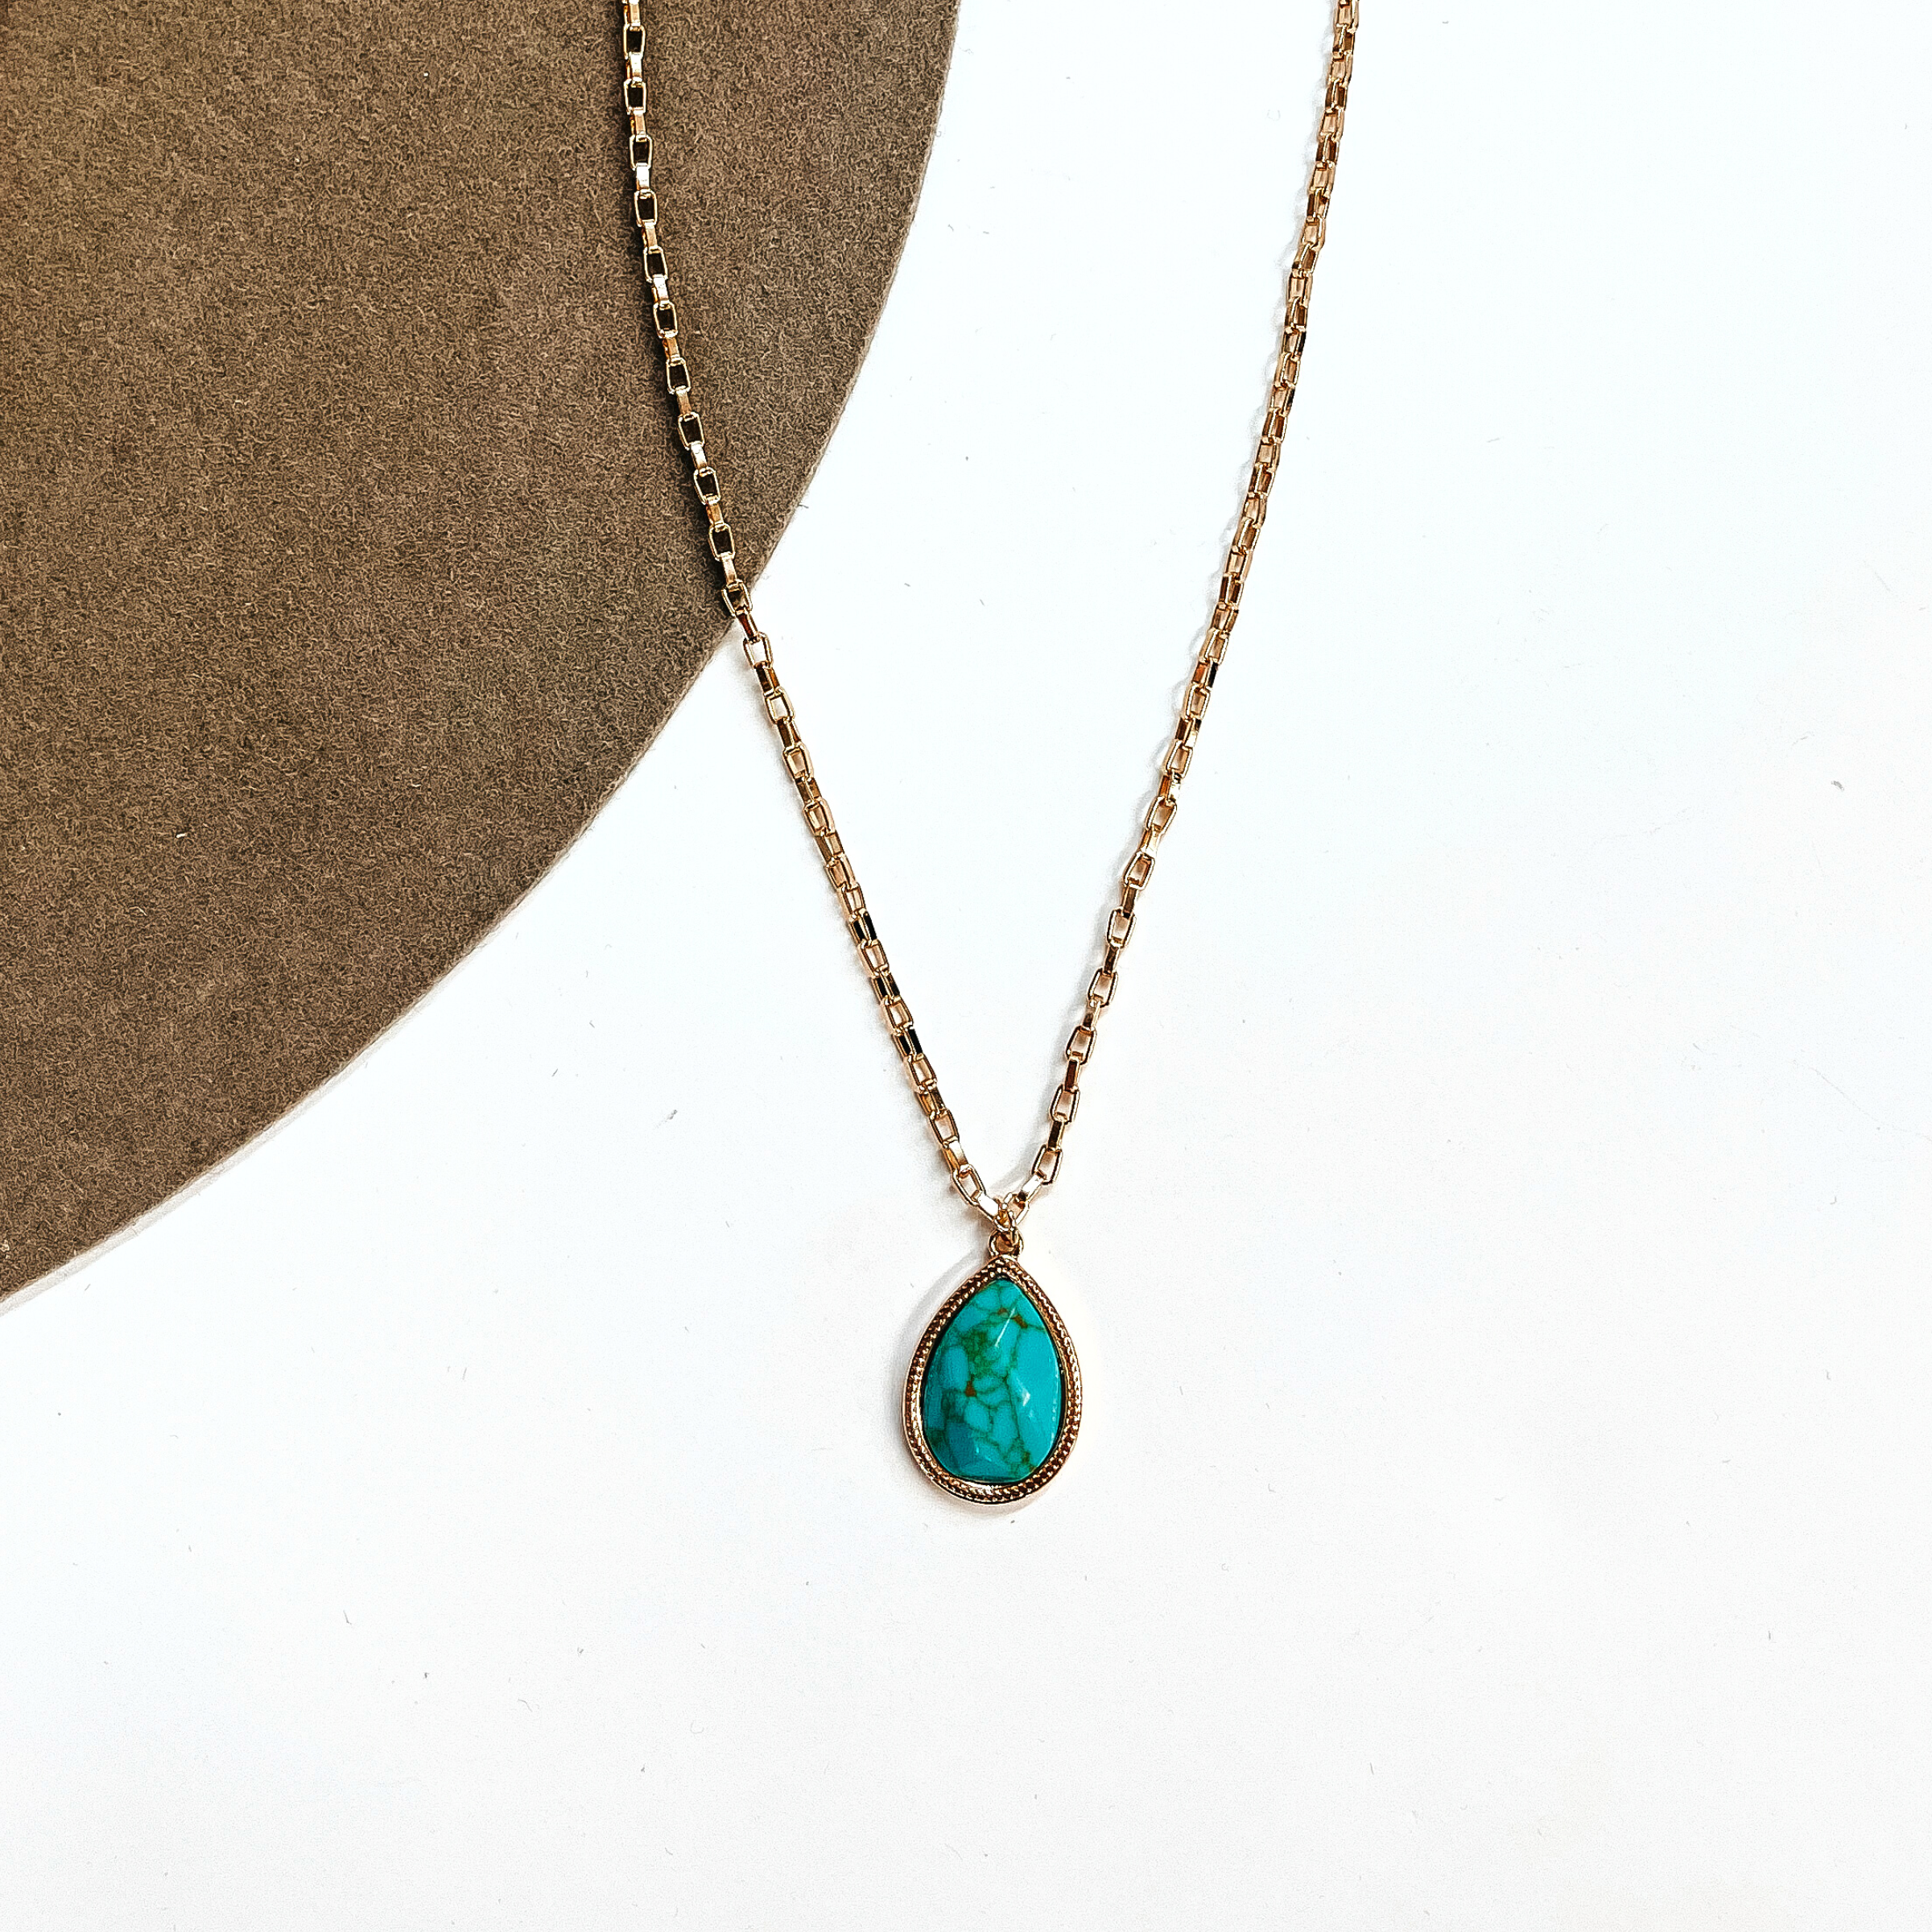 This is a thin gold tone chain necklace with a small teardrop pendant in the center. The  pendant has a turqouise stone shaped as a teardrop, the stone is in a gold setting. This  necklace is laying on a white background and on a light brown felt hat brim.